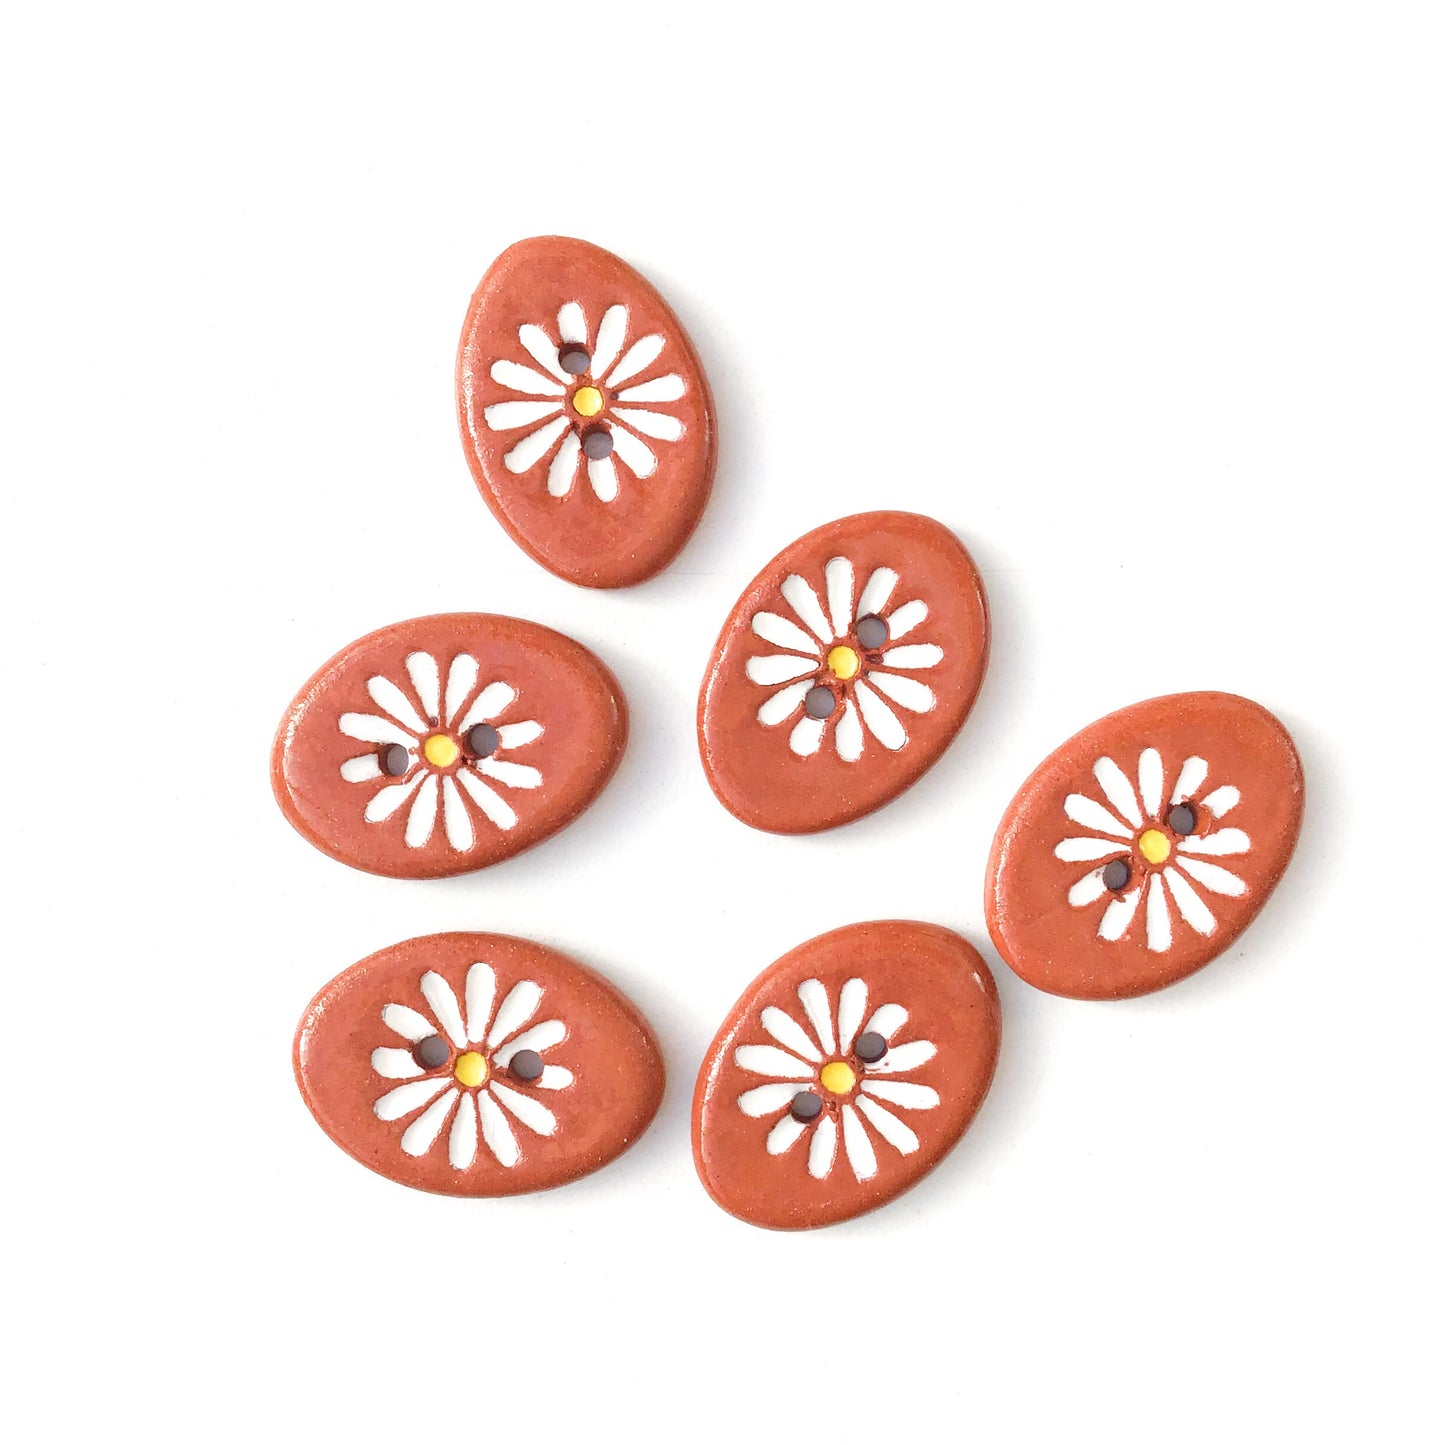 (Wholesale Accounts Only) 5/8" x 7/8" Daisy - oval -rounded edge - red clay (ws-293)